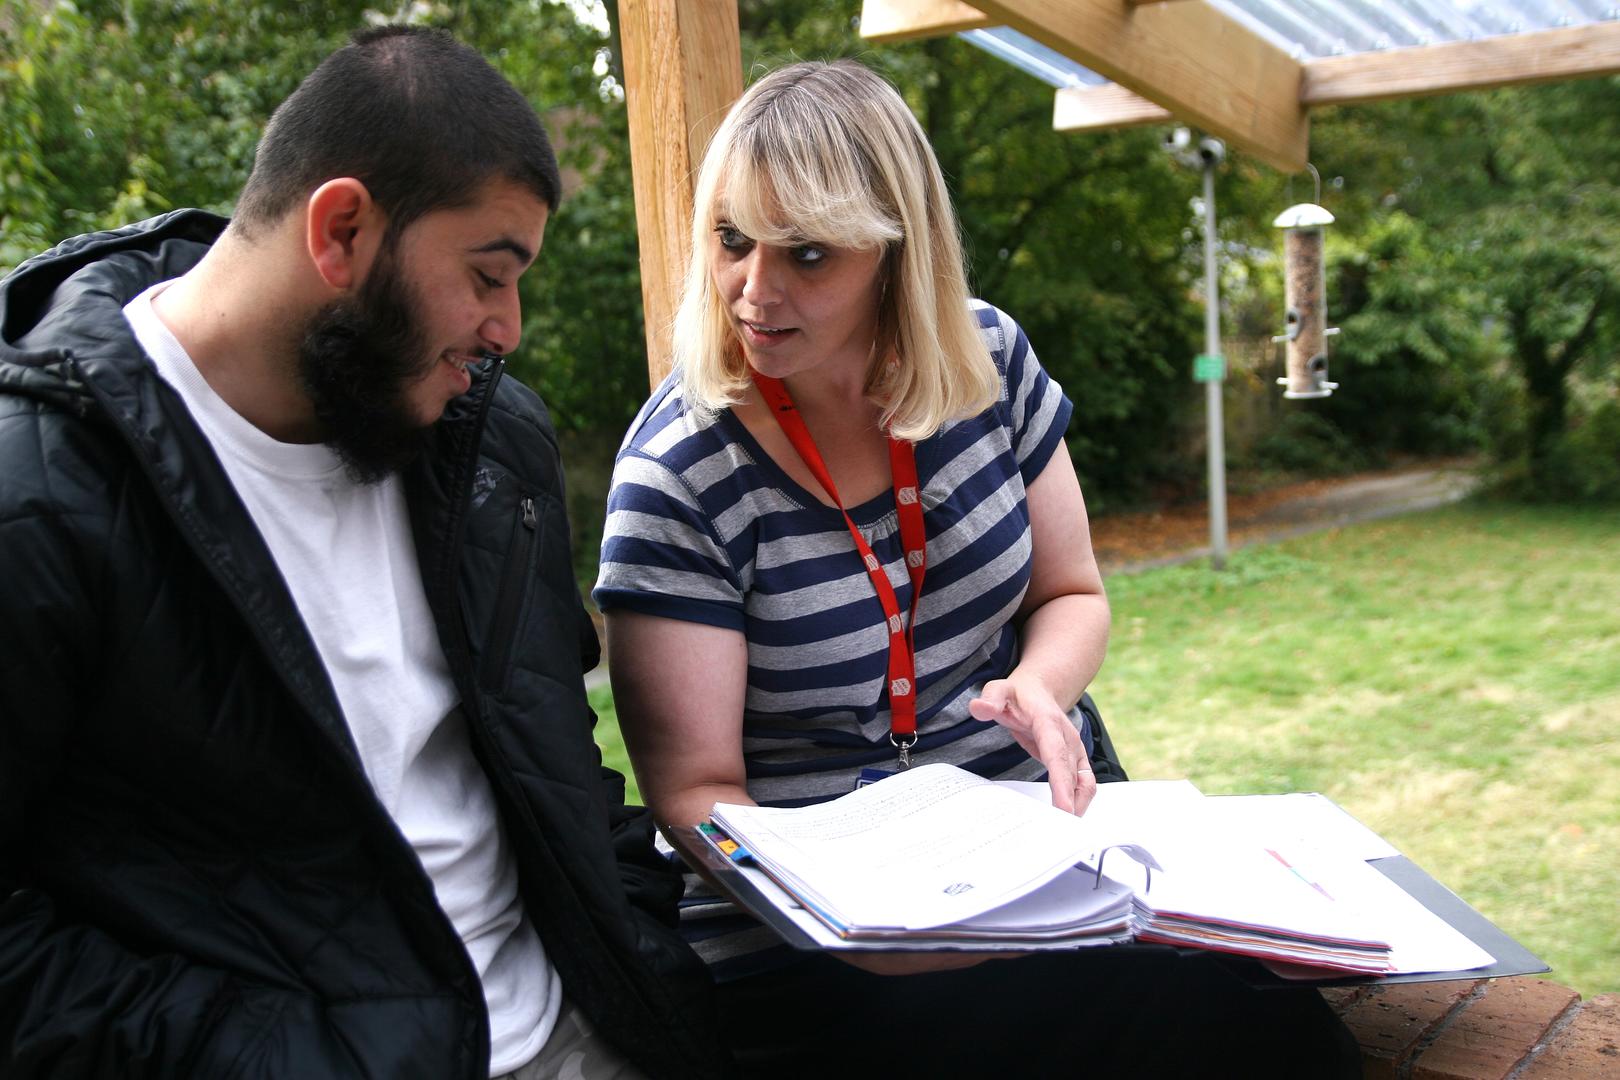 A member of staff helping a young person